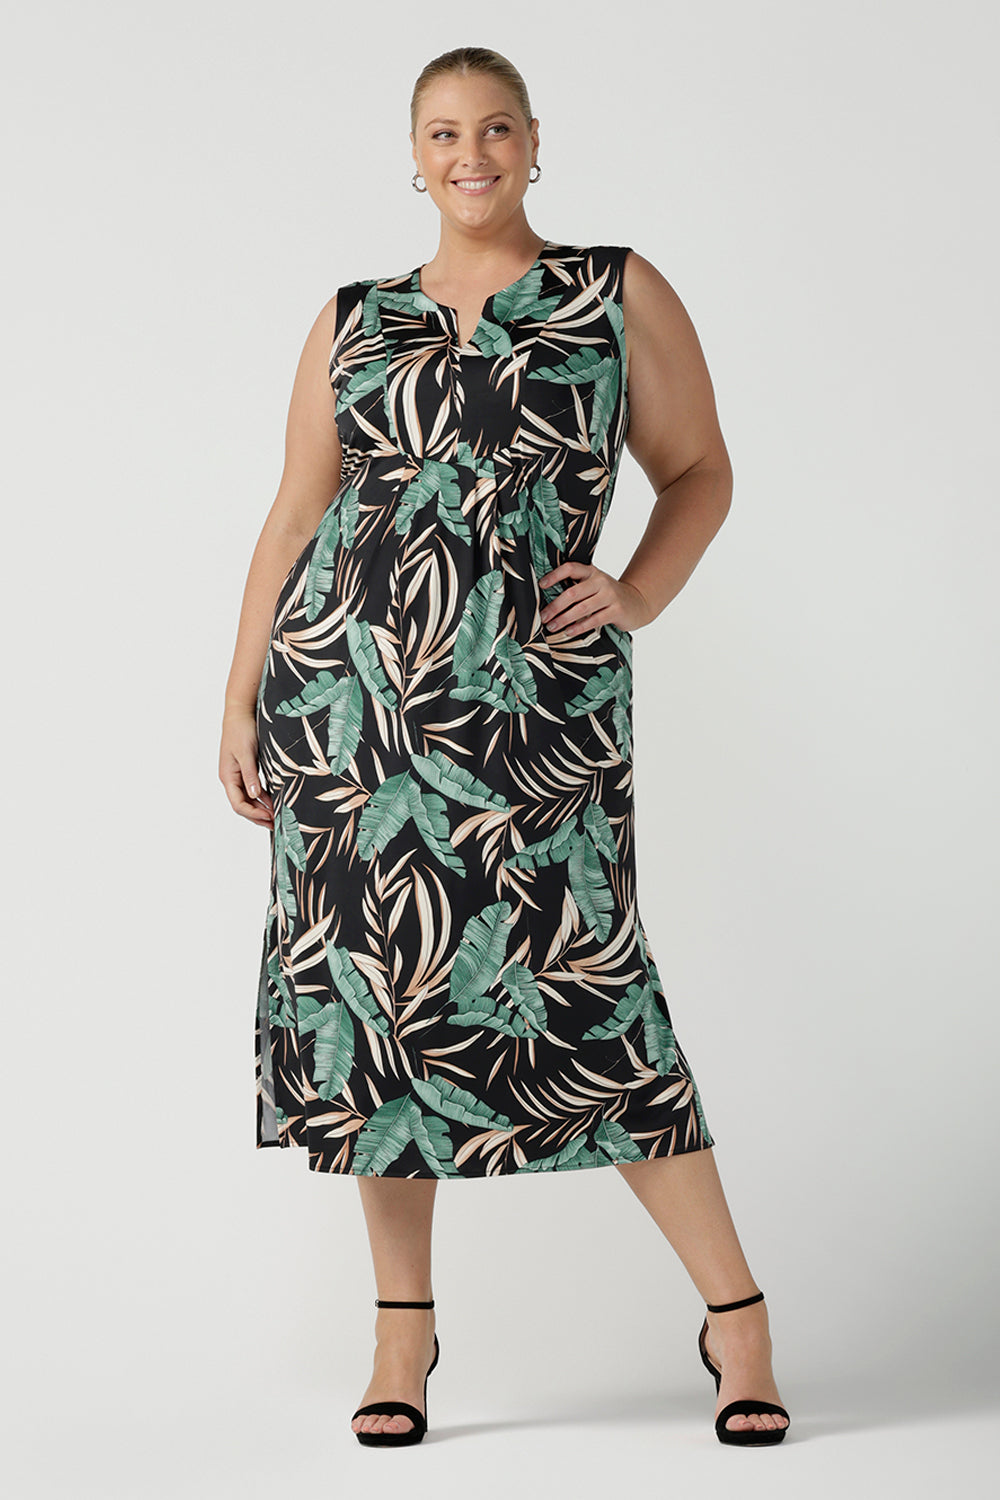 Women's curvy fashion pictured on plus size 18. A Tropical printed dress in a sleeveless design with pleated front and v-neckline. Australian made in size 8 - 24. 